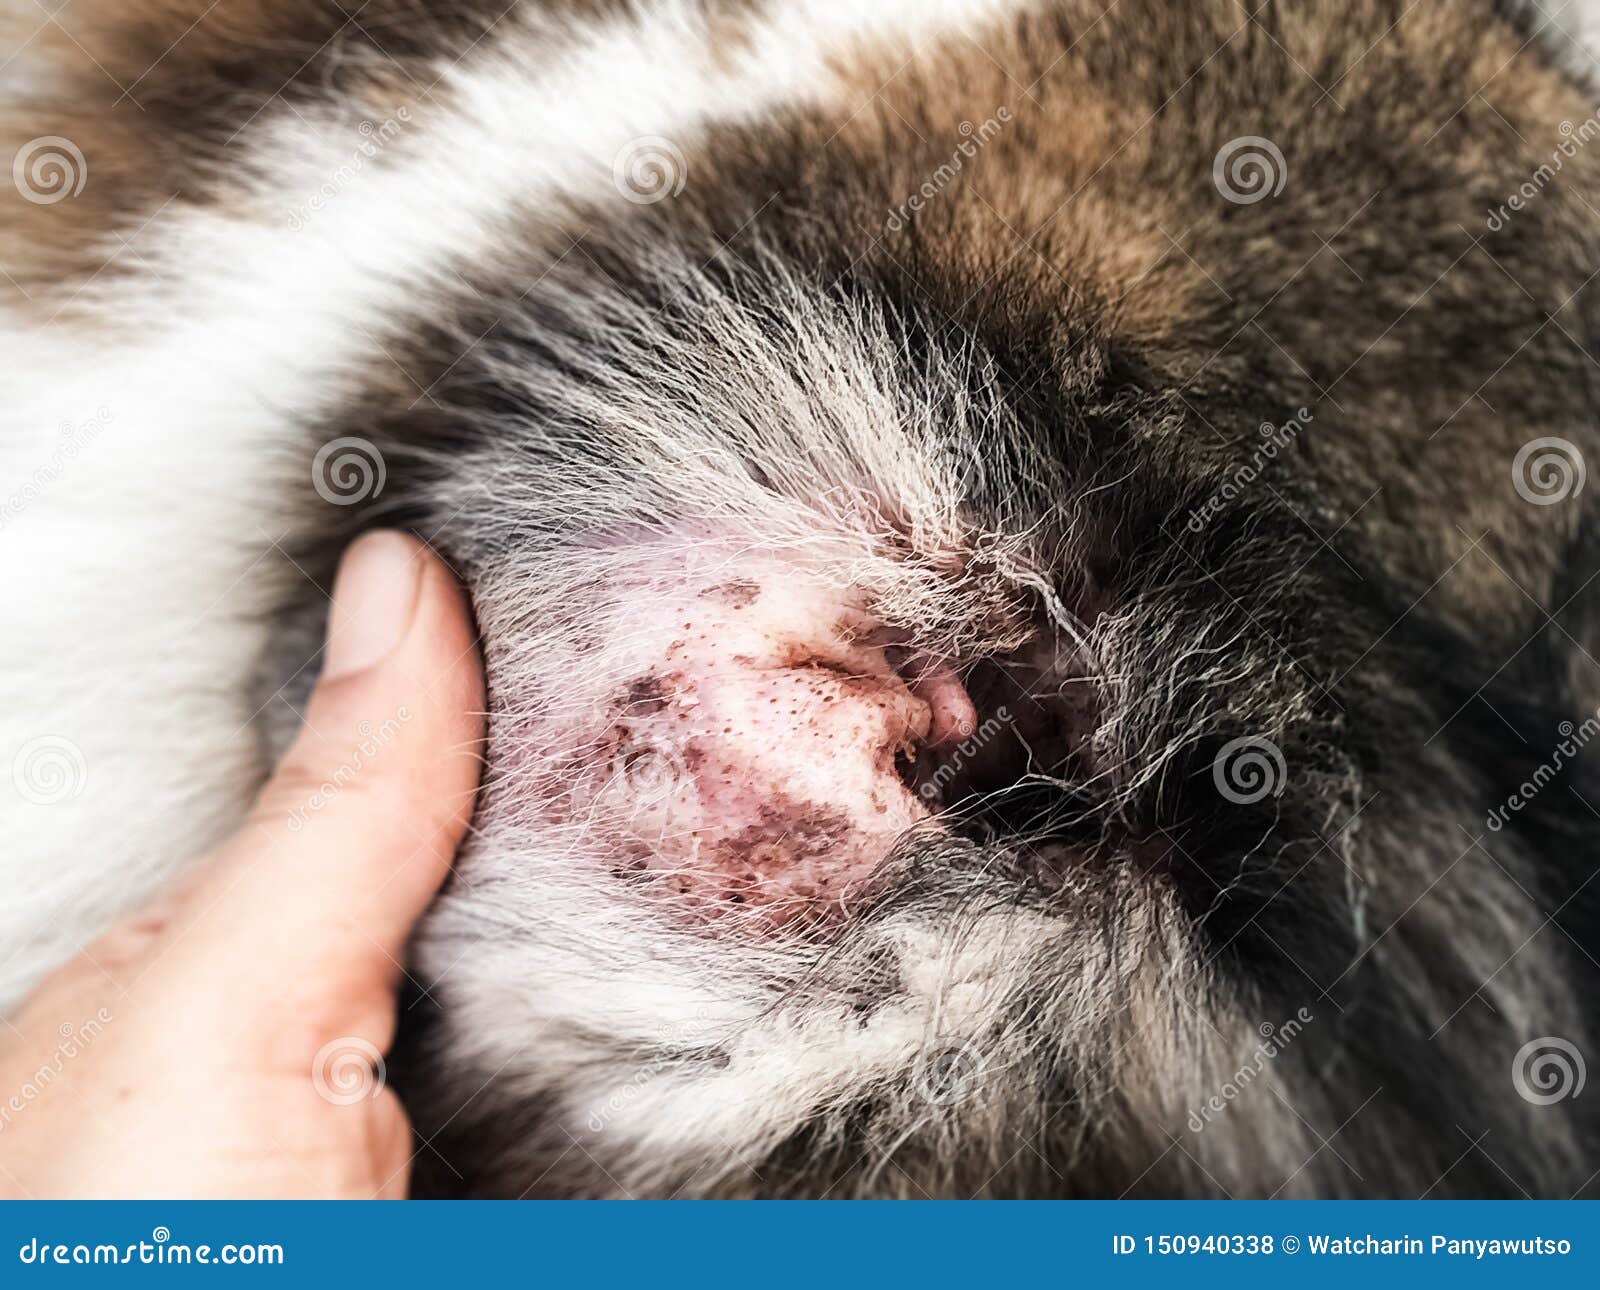 The Dermatitis In Dog Earshow The Disease Stock Photo Image Of